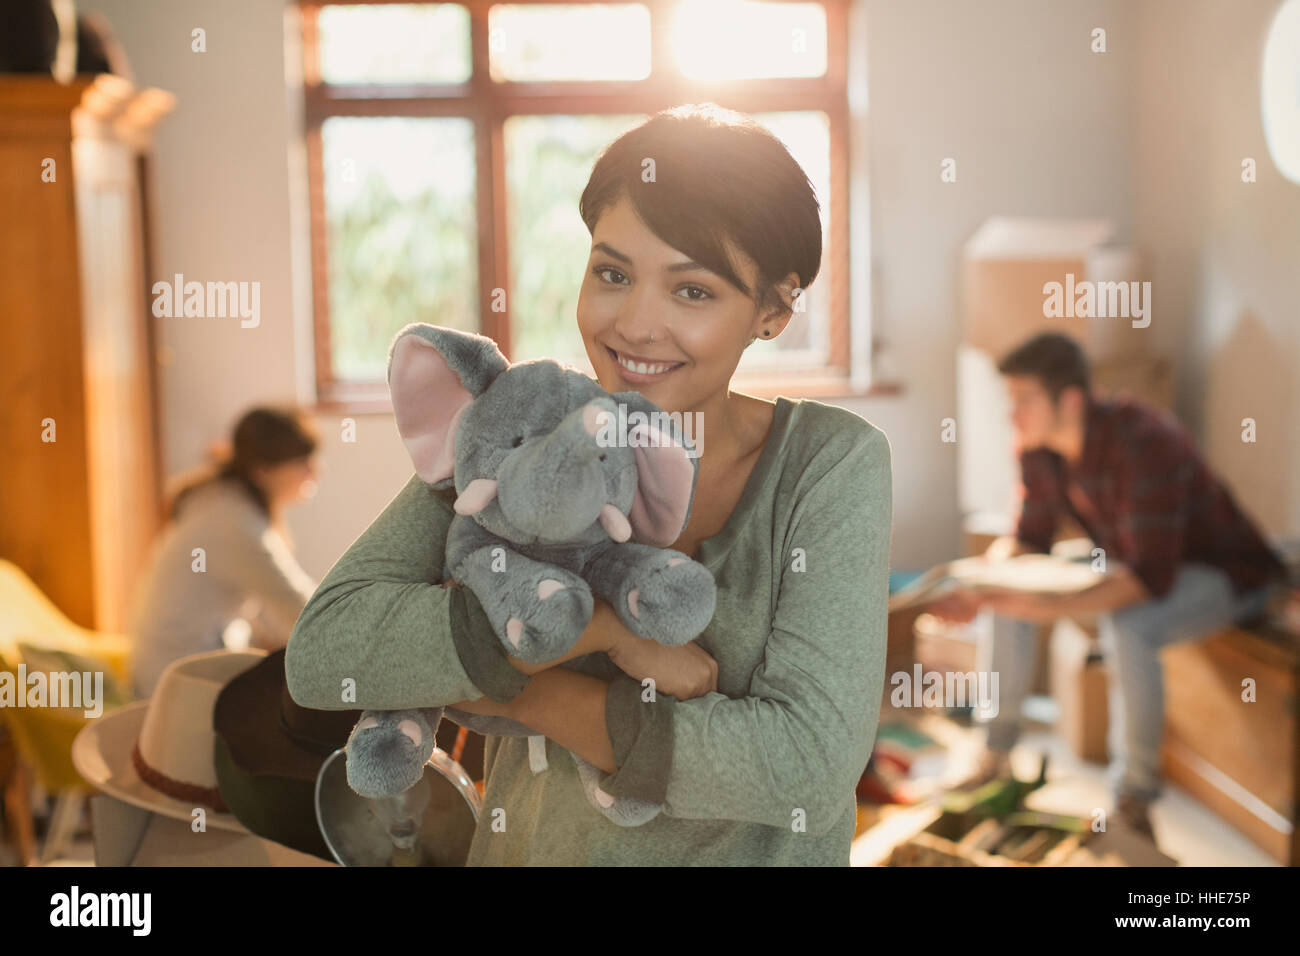 Portrait smiling young woman holding stuffed elephant Stock Photo